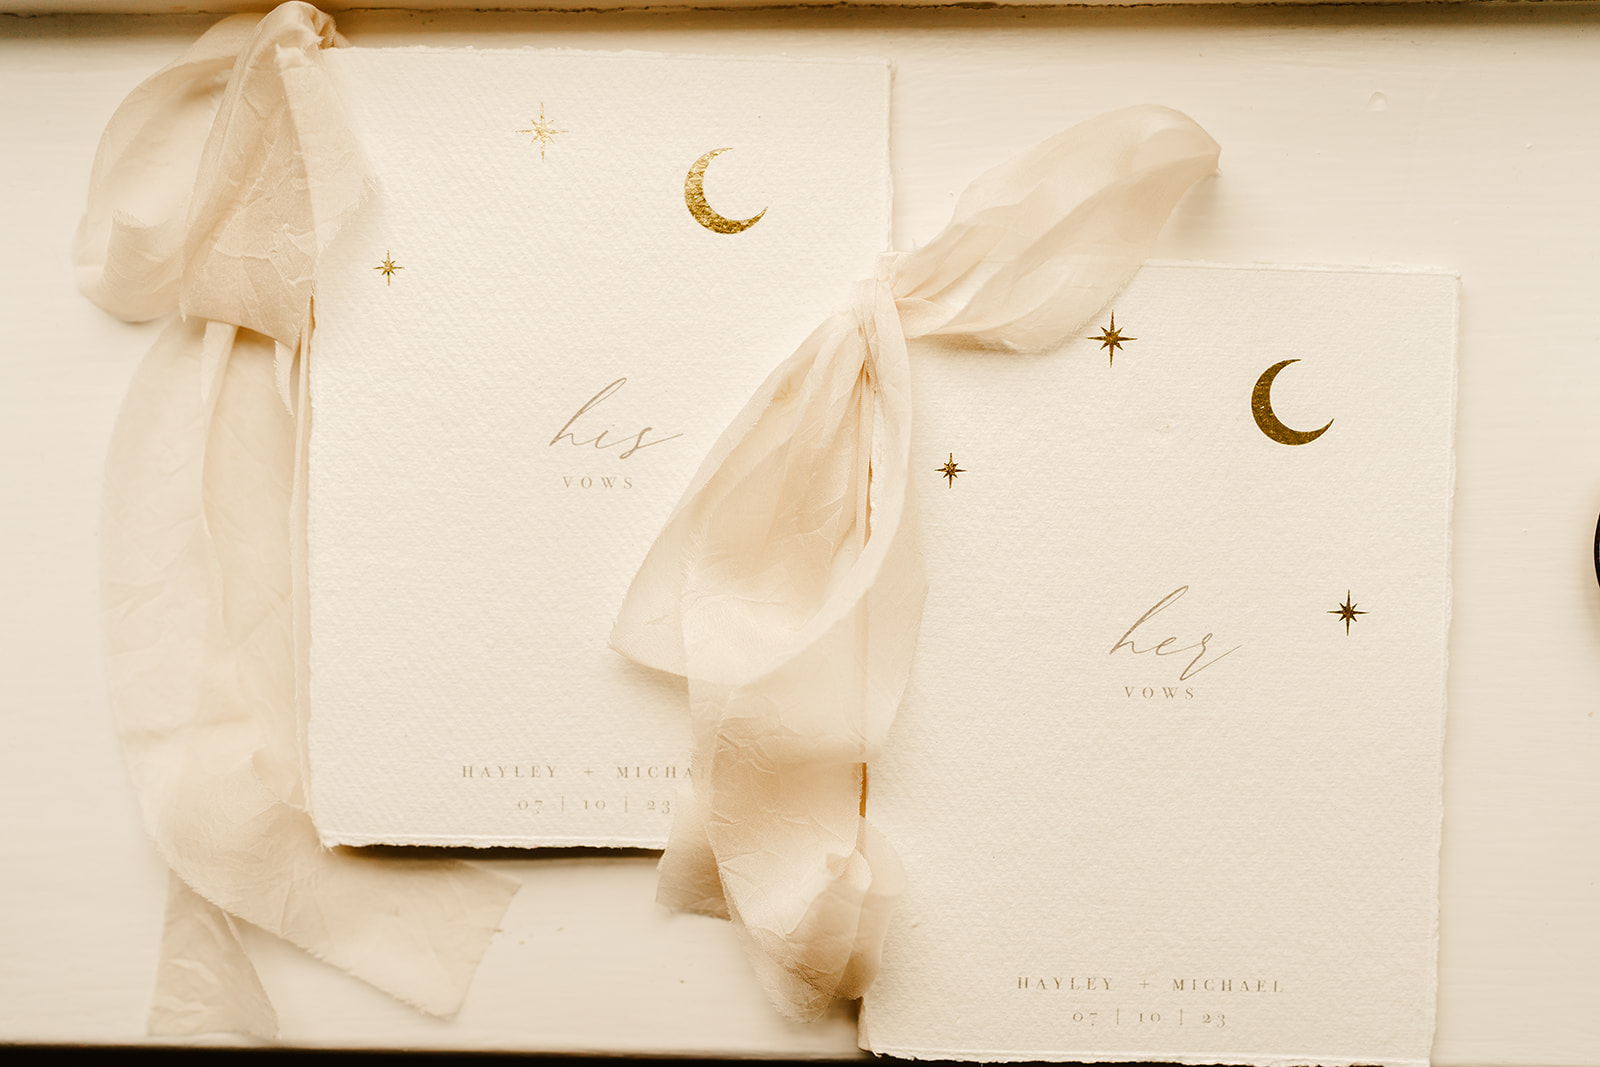 wedding vow cards with celestial print on them